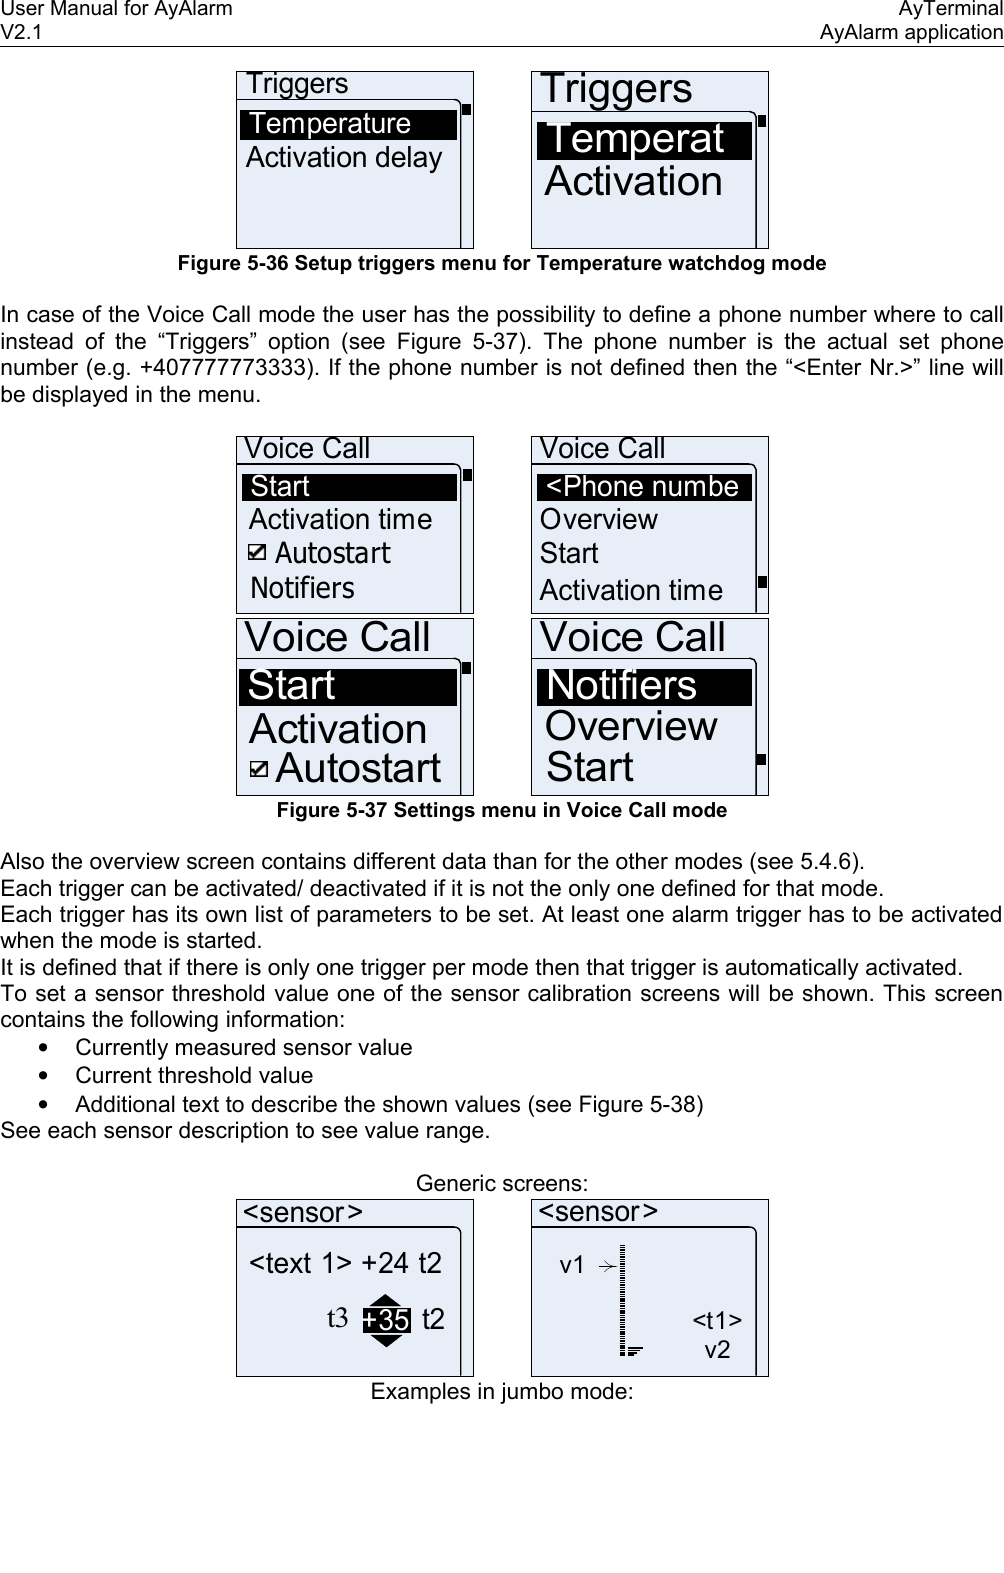 User Manual for AyAlarm AyTerminalV2.1 AyAlarm applicationTriggersTemperatureActivation delayTriggersTemperatActivation Figure 5-36 Setup triggers menu for Temperature watchdog modeIn case of the Voice Call mode the user has the possibility to define a phone number where to call instead of the “Triggers” option (see  Figure 5-37). The phone number is the actual set phone number (e.g. +407777773333). If the phone number is not defined then the “&lt;Enter Nr.&gt;” line will be displayed in the menu.Voice CallStartActivation timeAutostartNotifiersVoice Call&lt;Phone numbeOverviewStartActivation timeVoice CallStartAutostartActivationVoice CallNotifiersOverviewStartFigure 5-37 Settings menu in Voice Call modeAlso the overview screen contains different data than for the other modes (see 5.4.6).Each trigger can be activated/ deactivated if it is not the only one defined for that mode. Each trigger has its own list of parameters to be set. At least one alarm trigger has to be activated when the mode is started. It is defined that if there is only one trigger per mode then that trigger is automatically activated. To set a sensor threshold value one of the sensor calibration screens will be shown. This screen contains the following information:•Currently measured sensor value•Current threshold value•Additional text to describe the shown values (see Figure 5-38)See each sensor description to see value range.Generic screens:&lt;sensor&gt;&lt;text 1&gt; +24 t2t3+35 t2v1&lt;t1&gt;v2&lt;sensor&gt;Examples in jumbo mode: